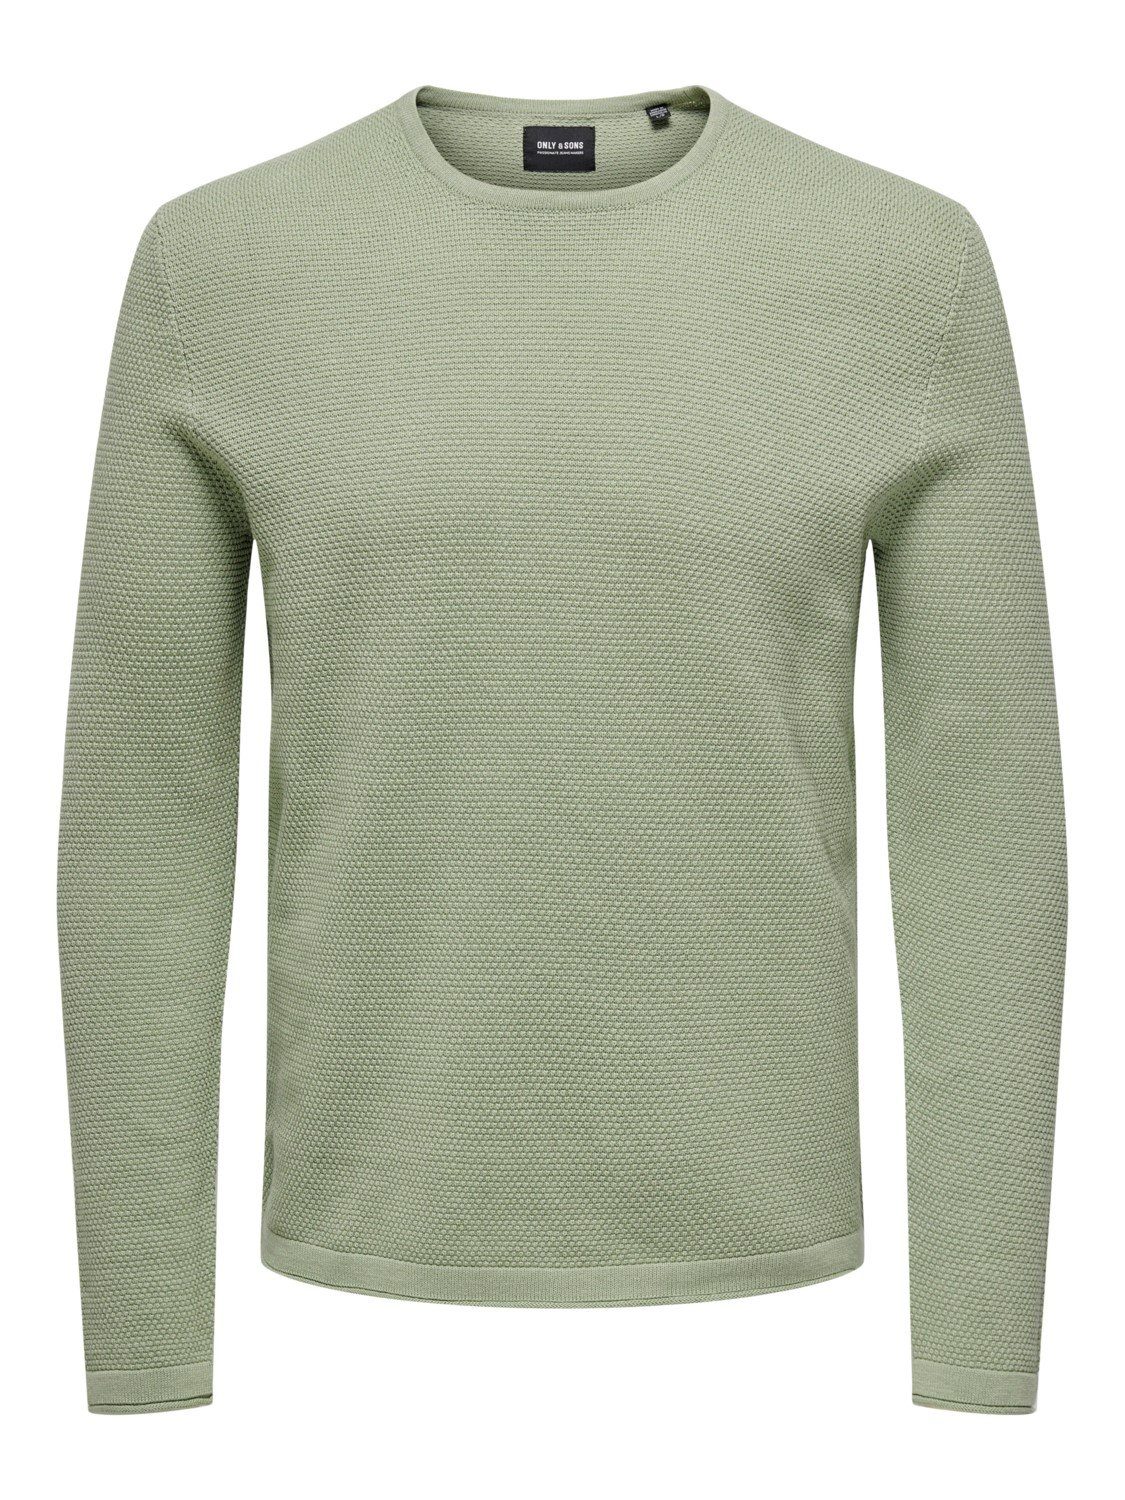 & SONS Strickpullover Langarm in Rundhals Strickpullover Sweater ONLY 4421 Dünner ONSPANTER Basic Mint